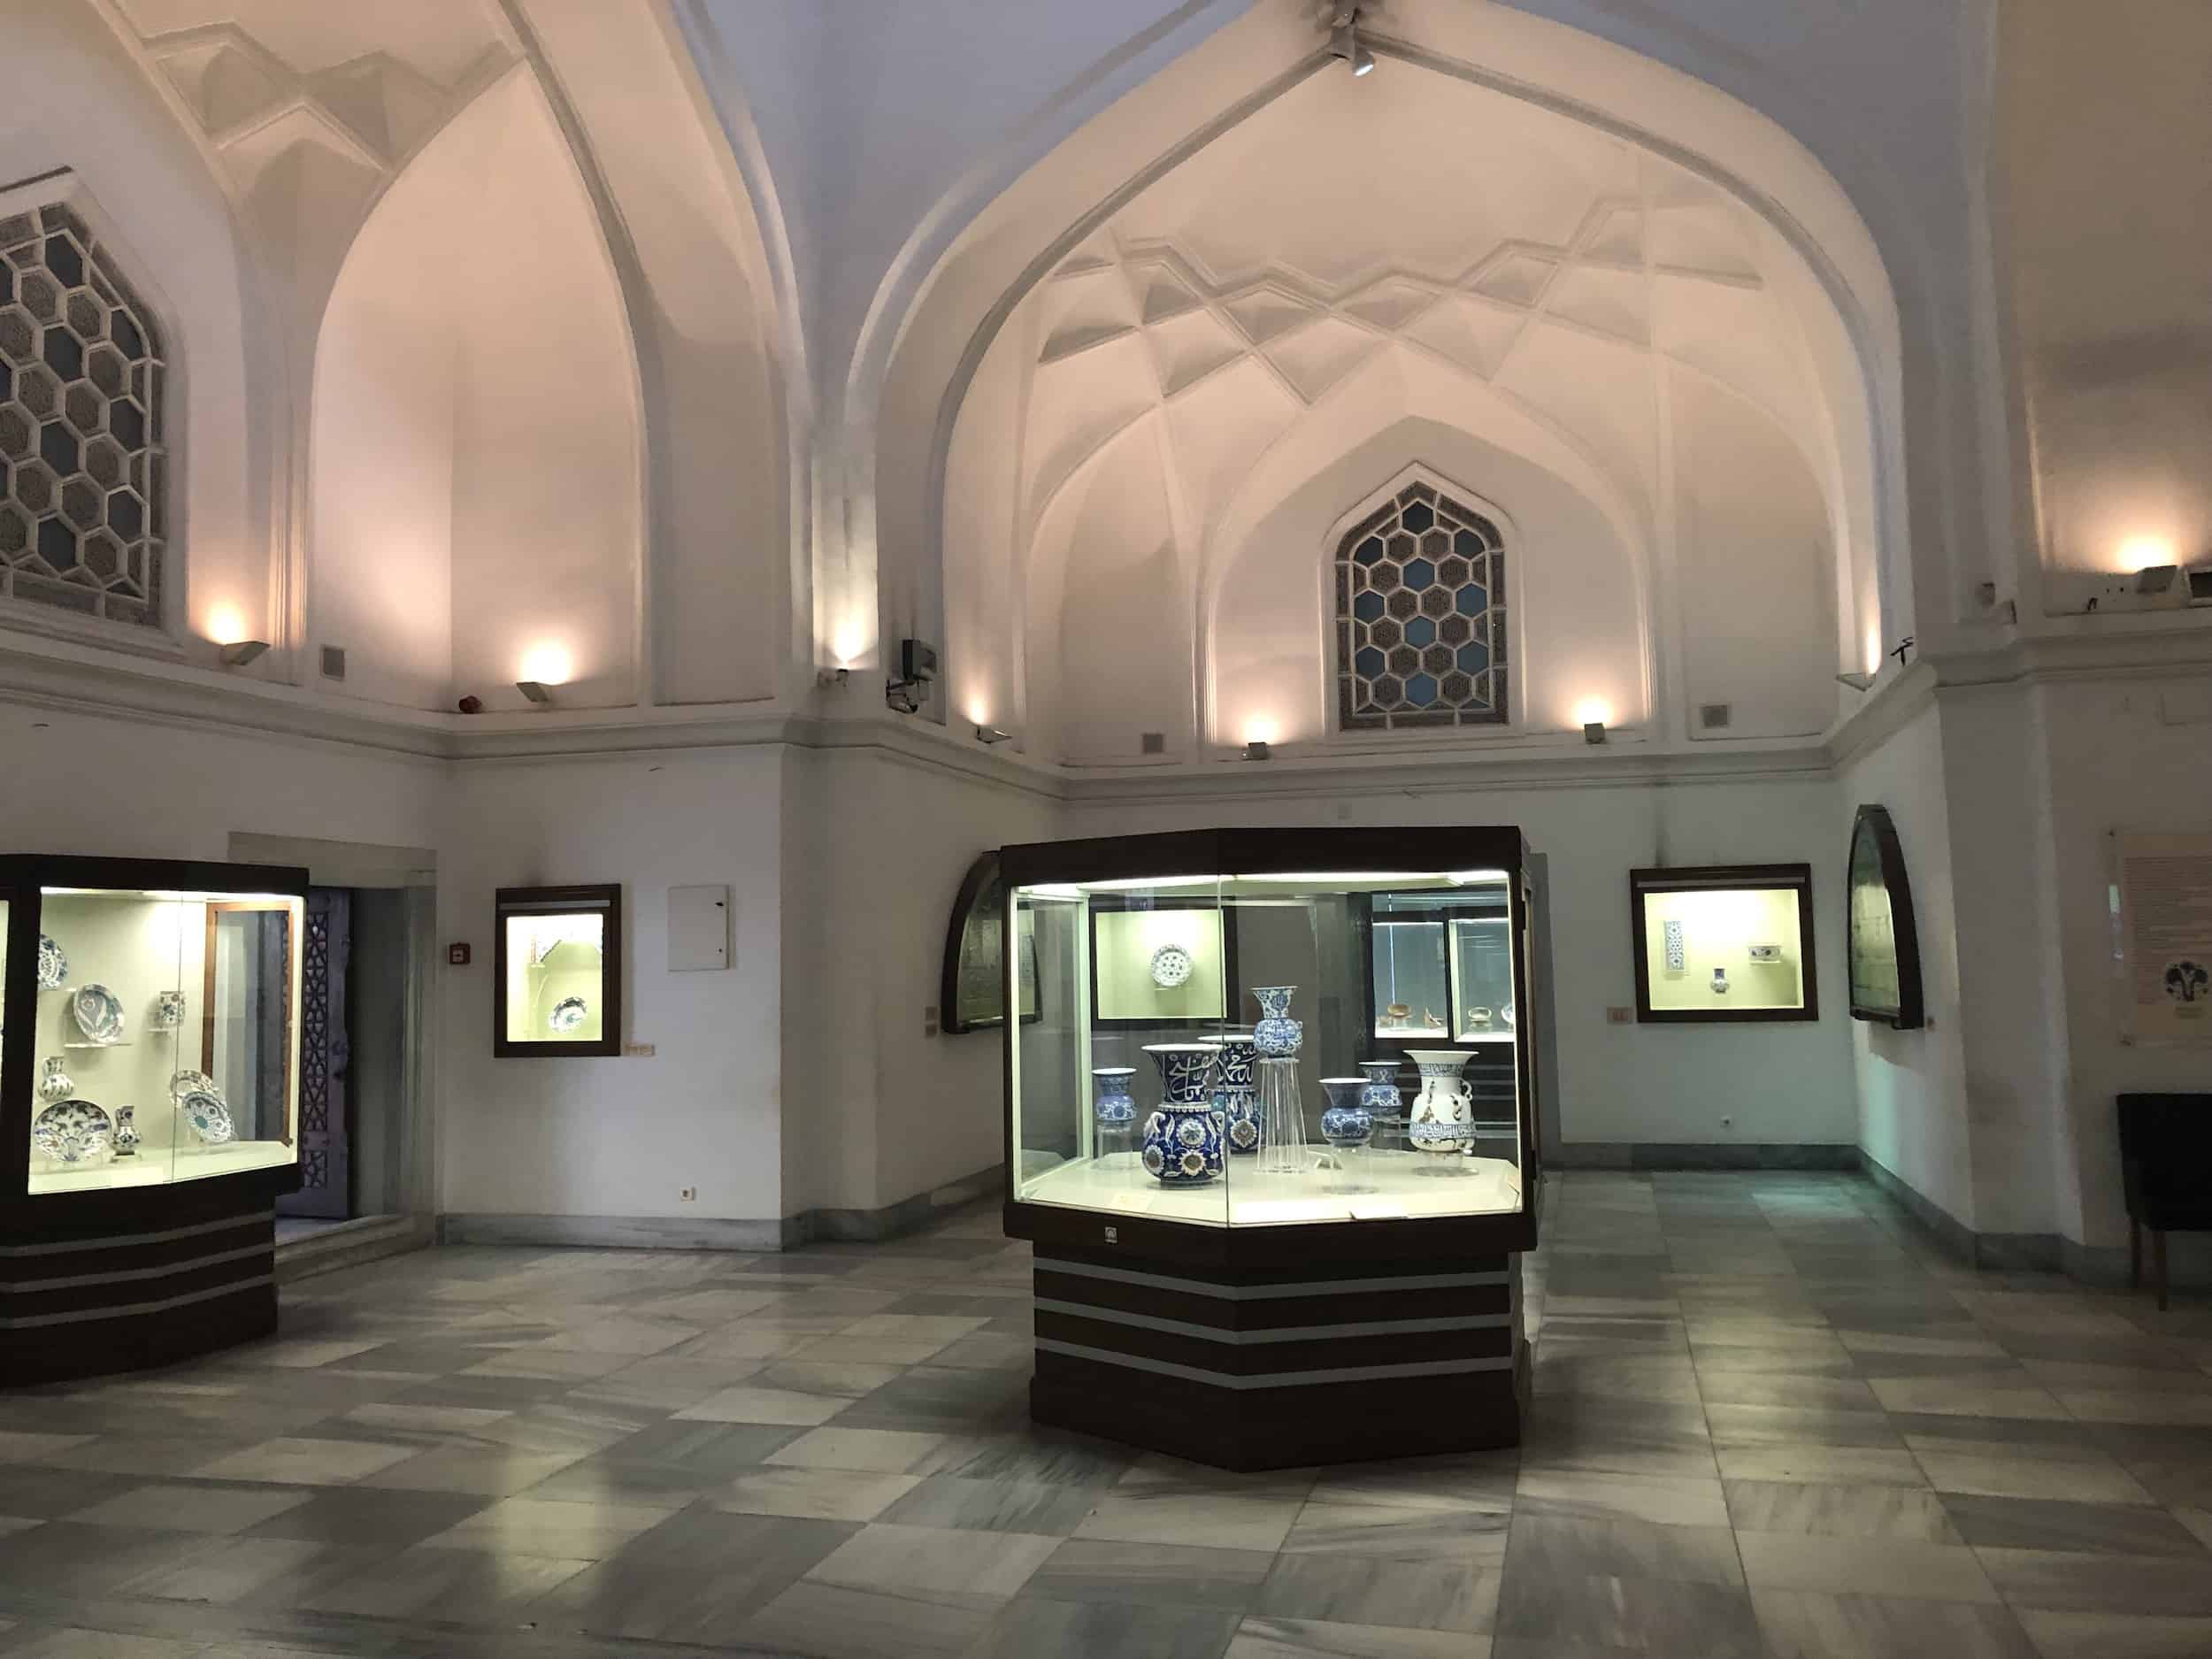 Tiled Kiosk at the Istanbul Archaeology Museums in Istanbul, Turkey